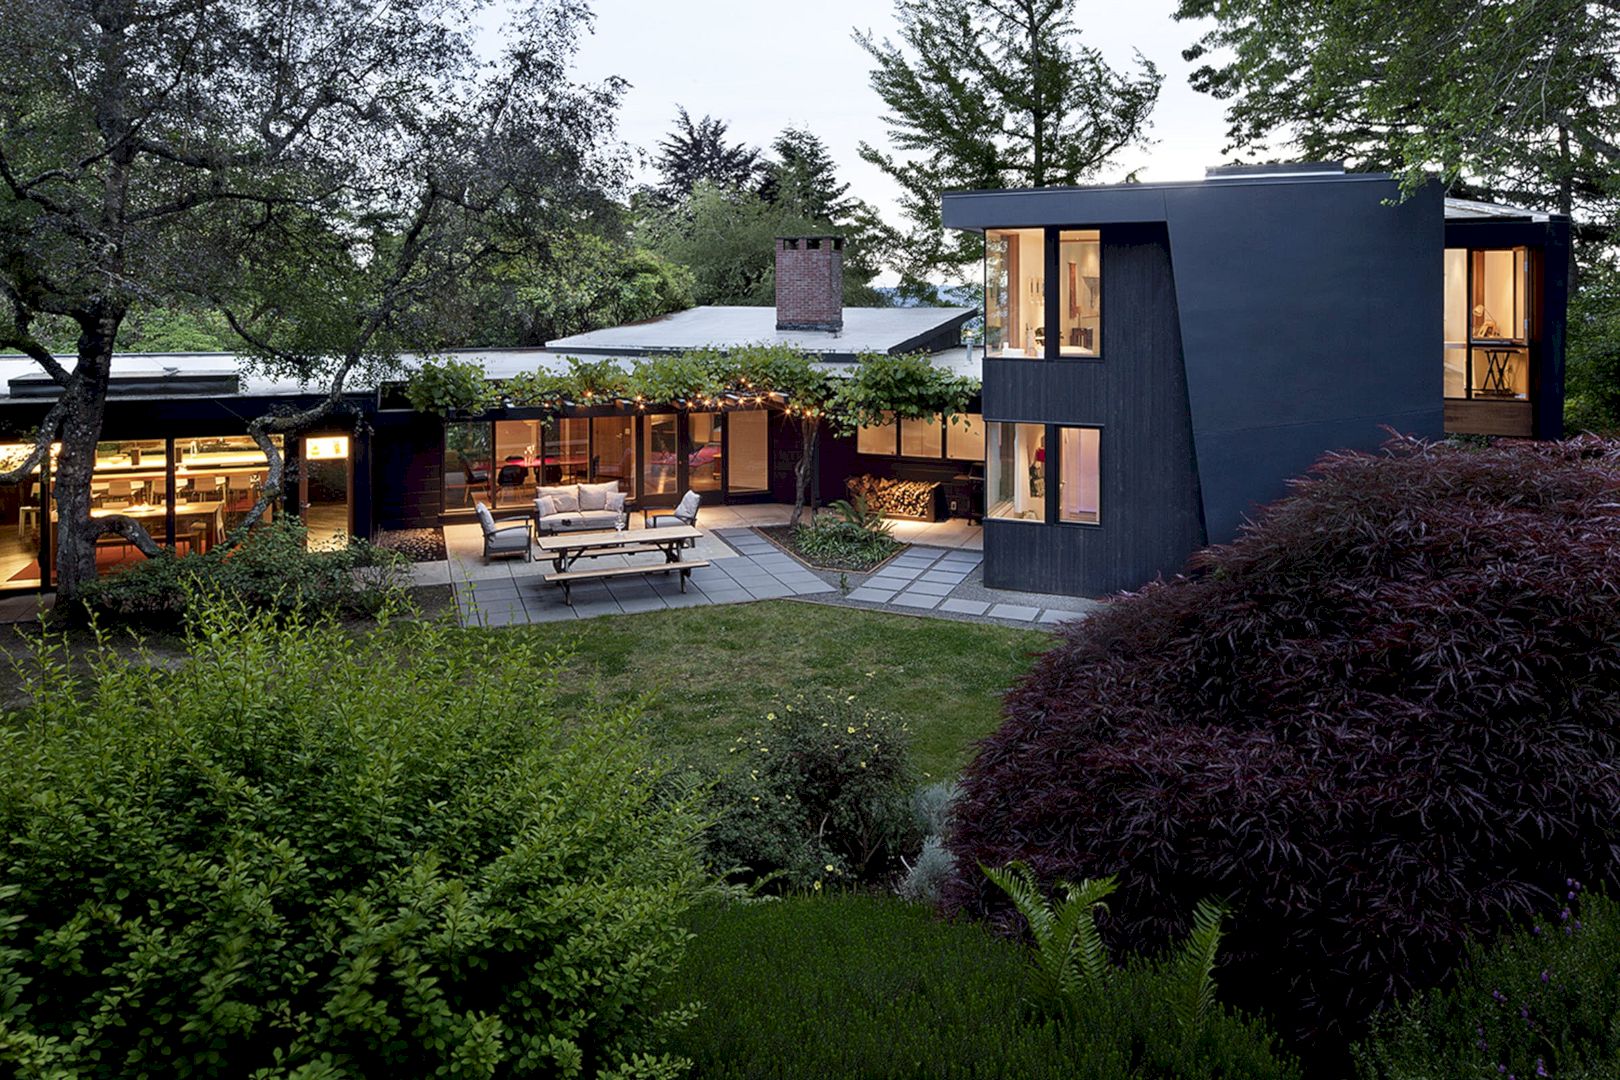 Meschter Residence: A New Big Home with Three Wings